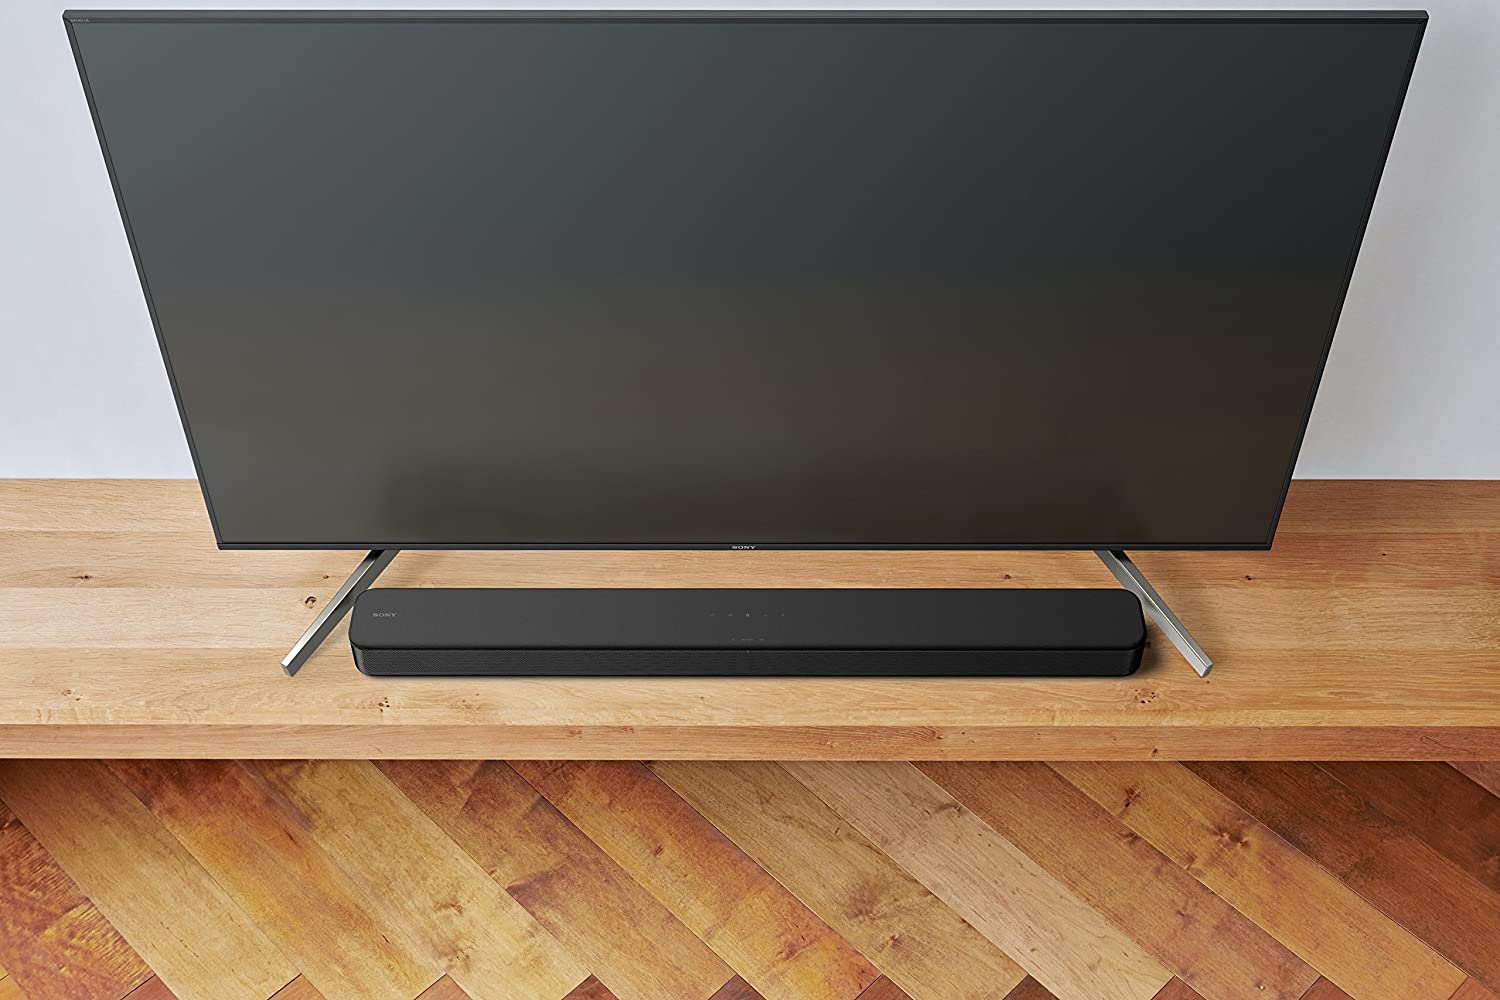 The Sony S100F, one of the best sound bars available on Amazon now